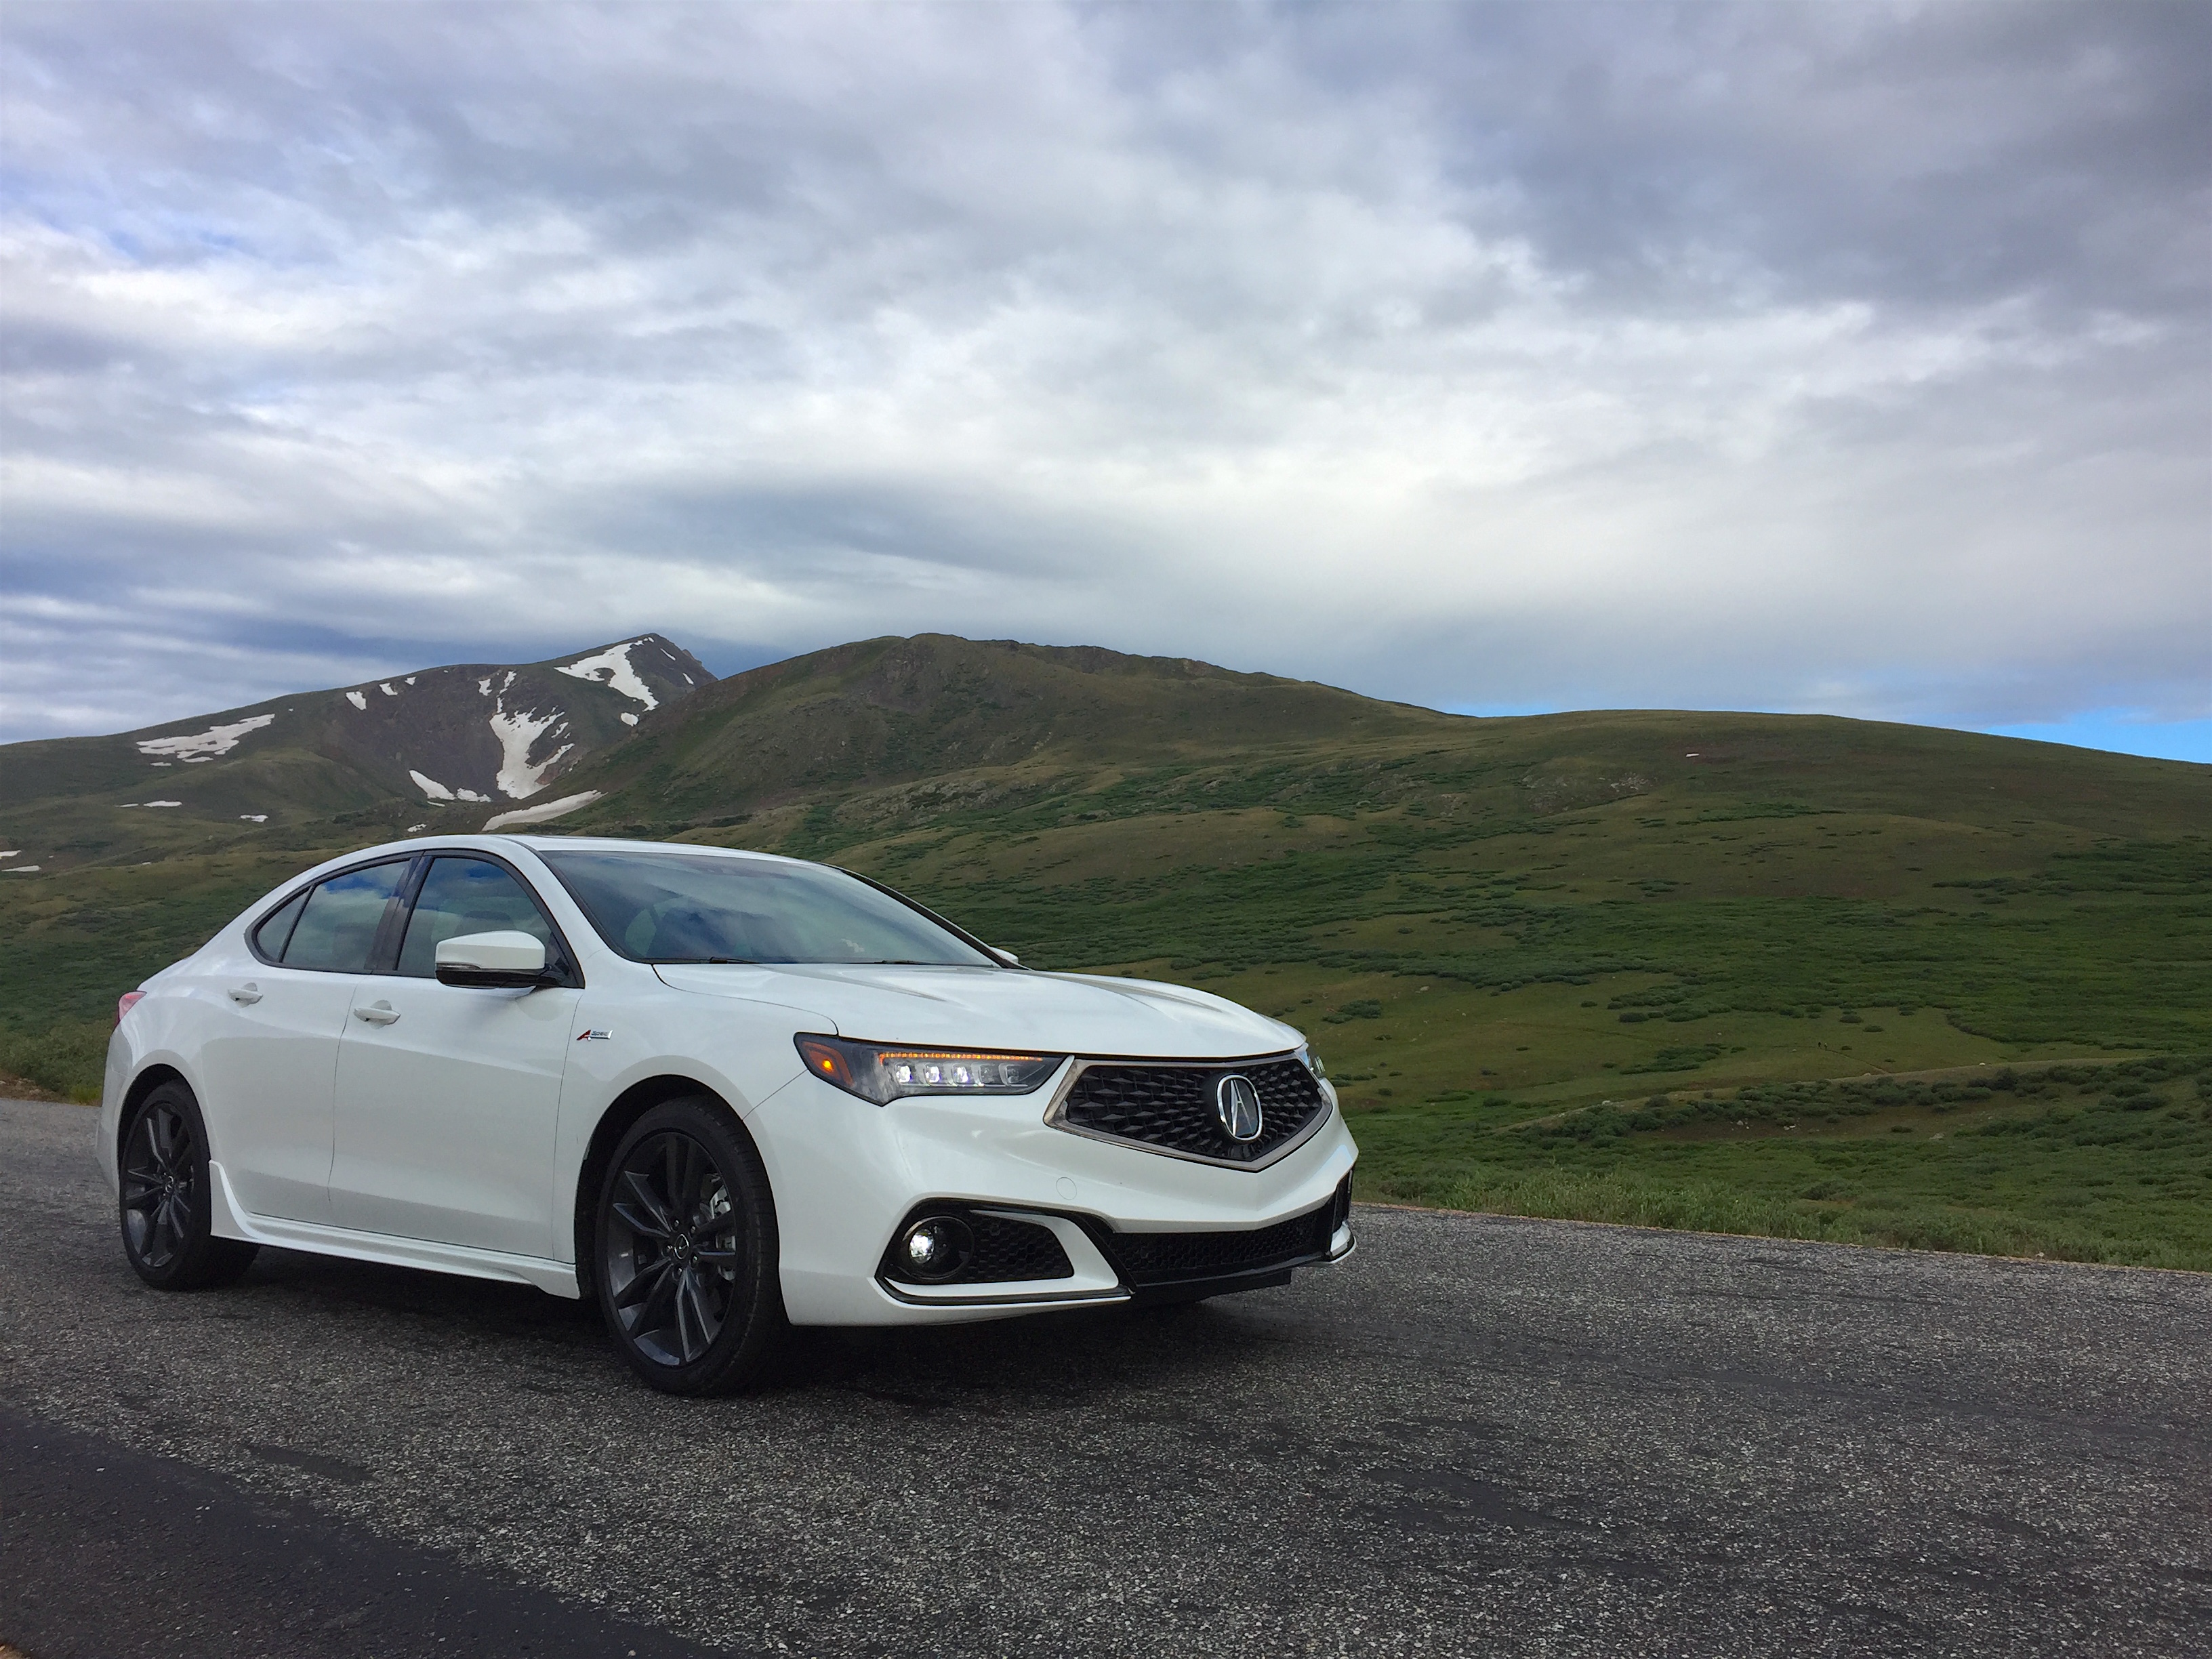 Acura TLX exterior restyling